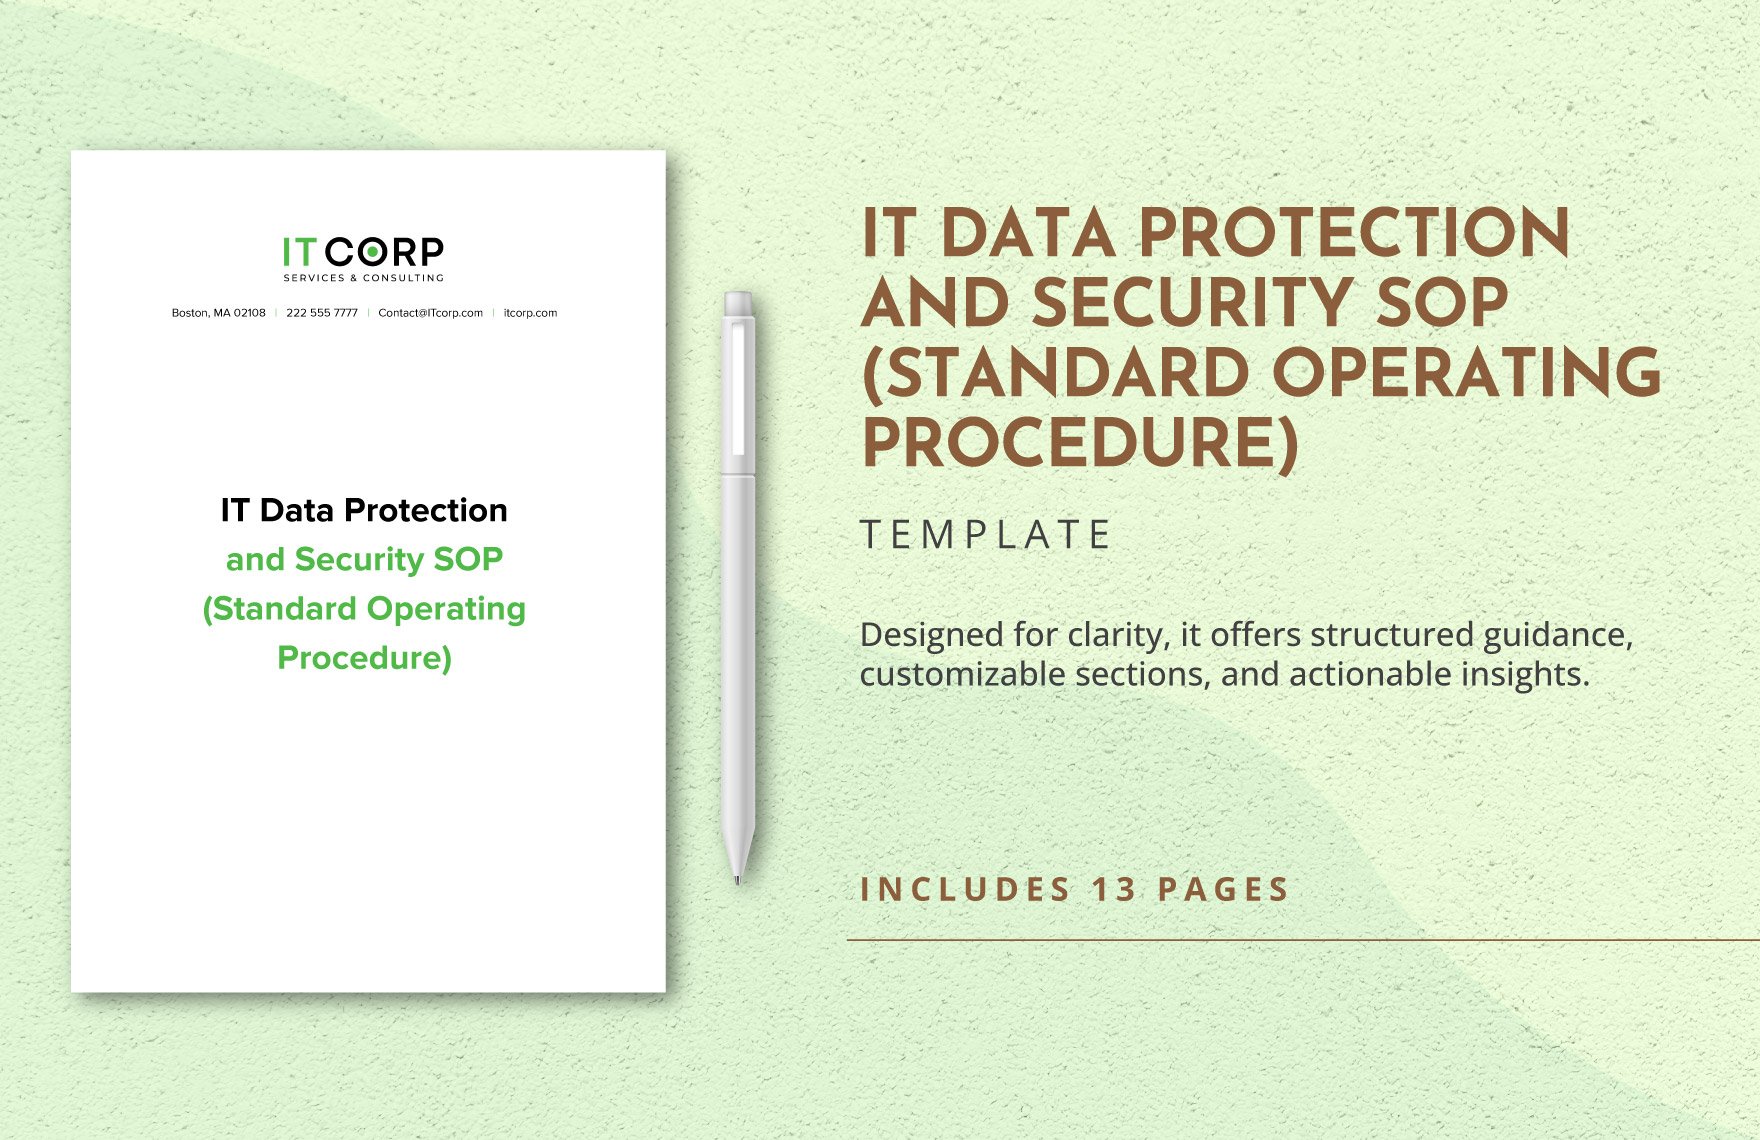 IT Data Protection and Security SOP (Standard Operating Procedure) Template